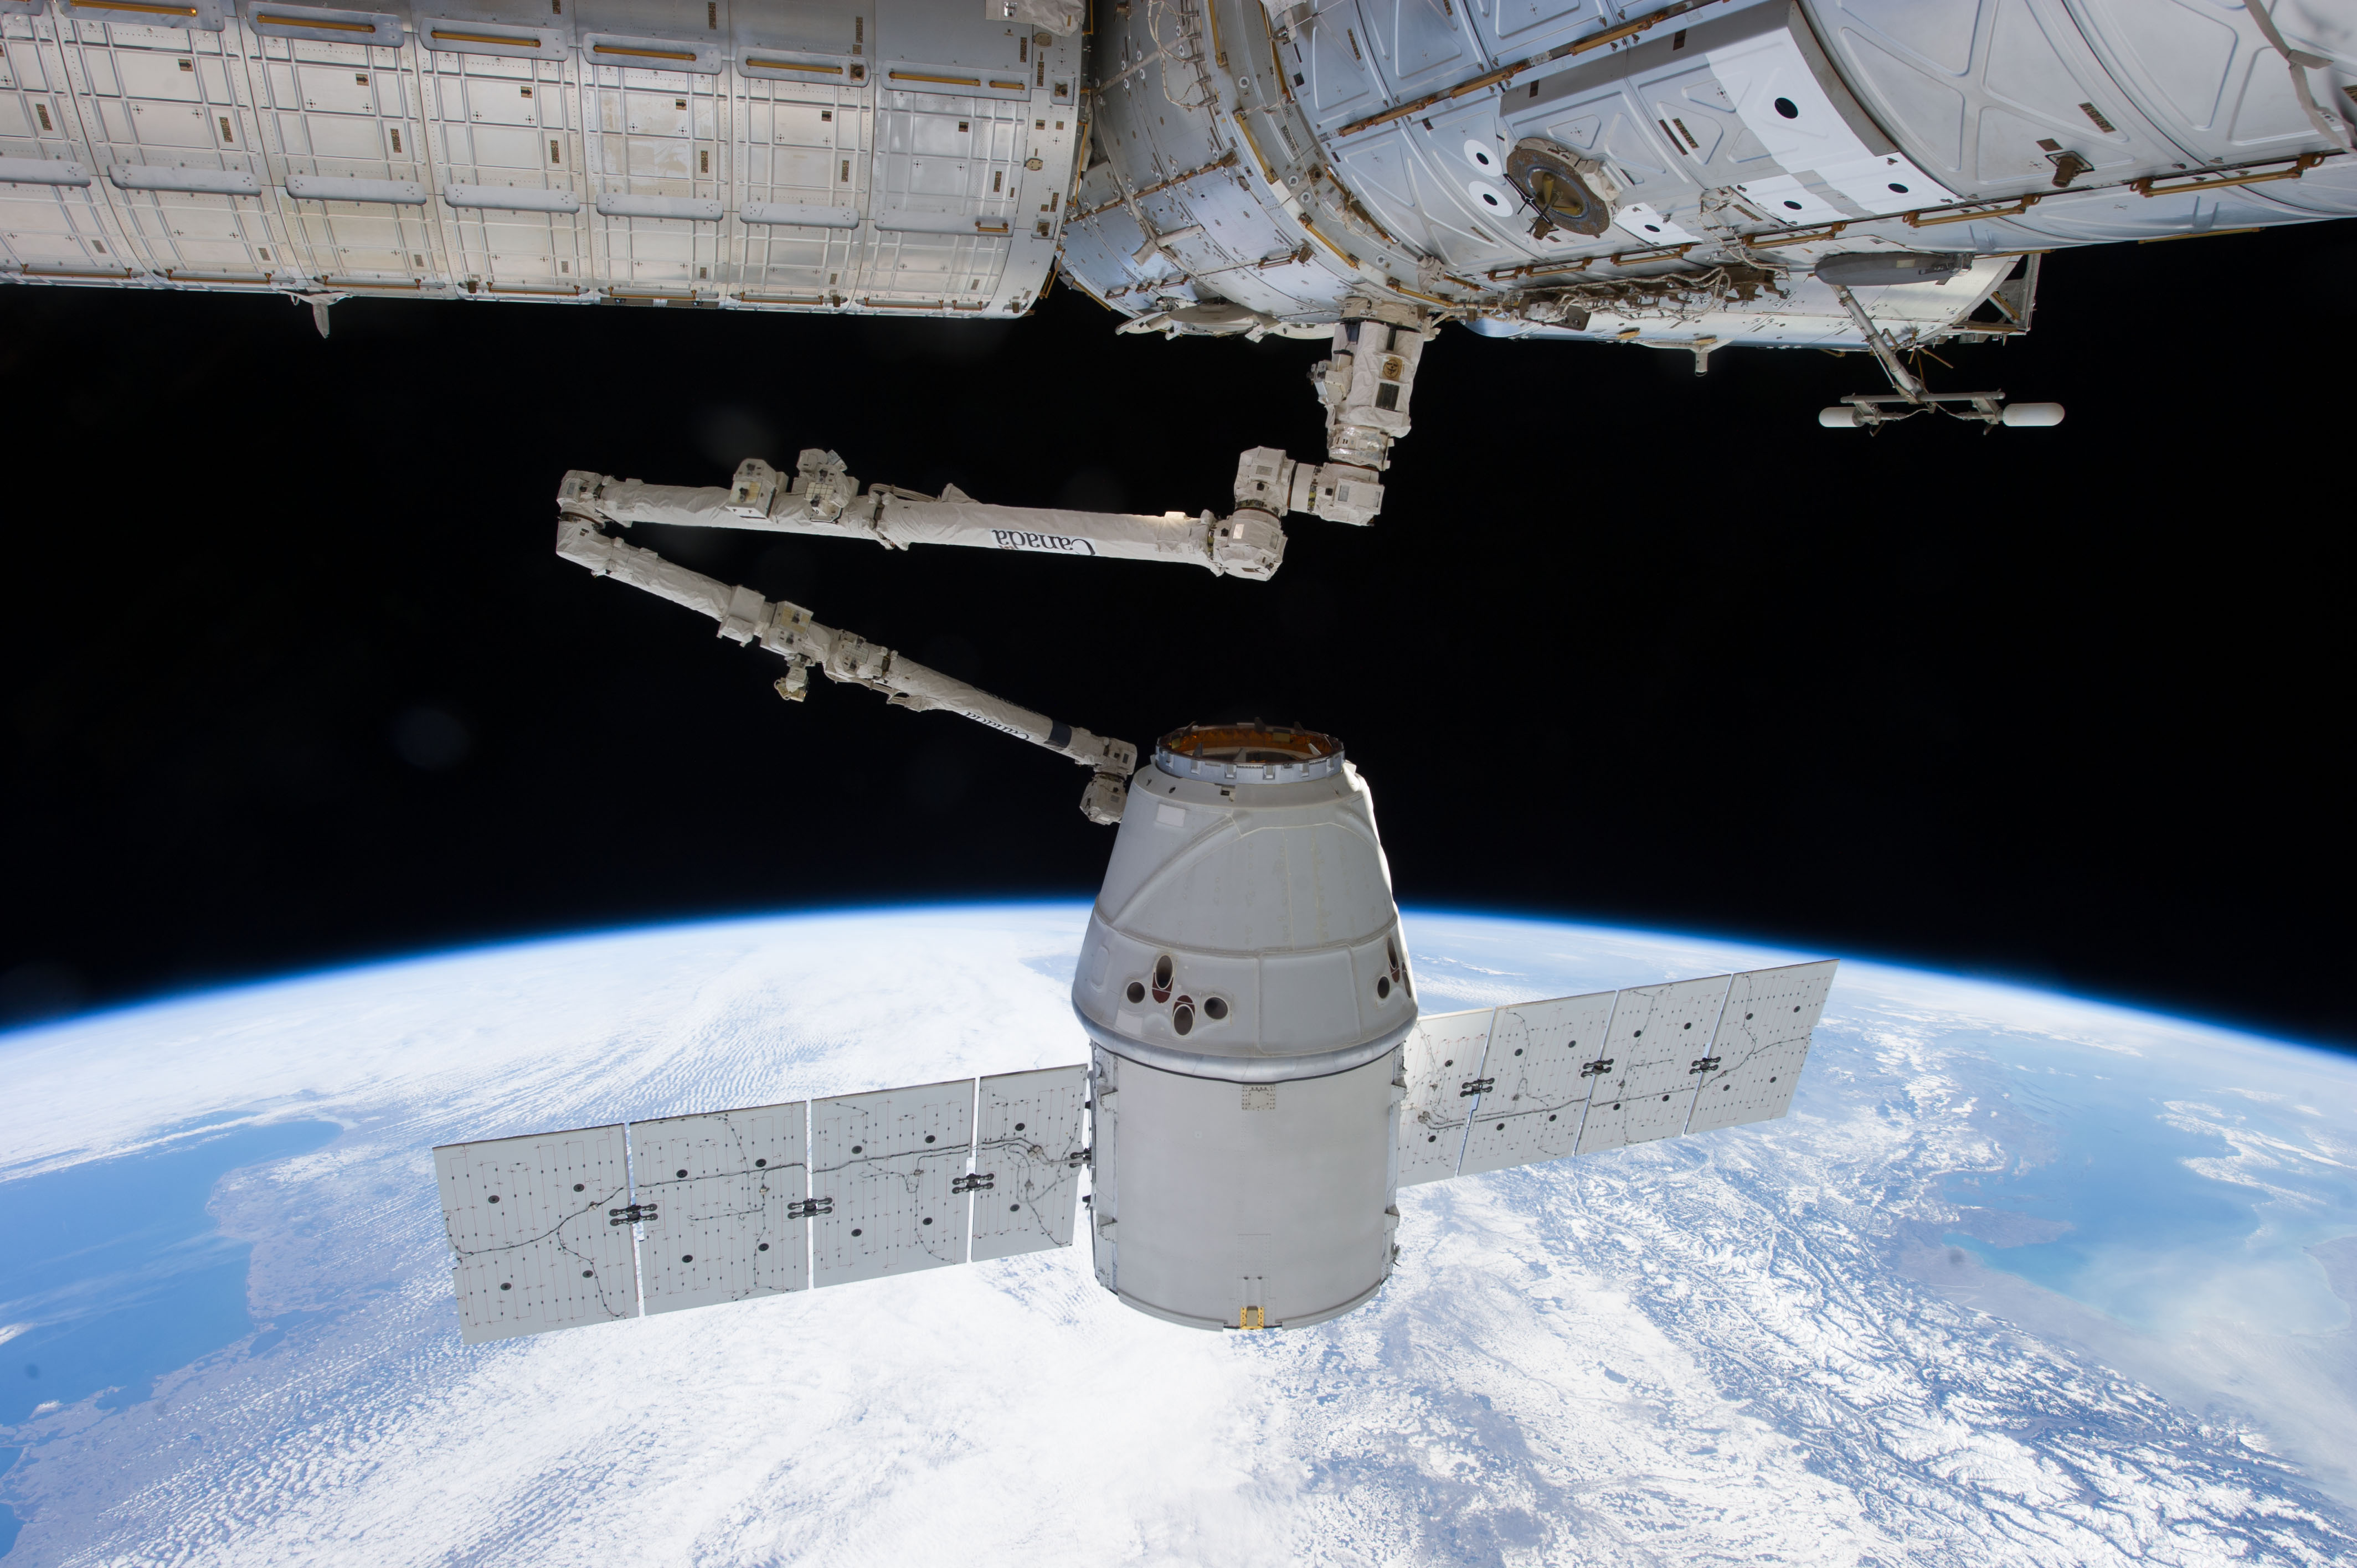 SpaceX's Dragon capsule berthed at the International Space Station (ISS) during the CRS-2 mission in early 2013.  SpaceX President Gwynne Shotwell discussed the upcoming CRS-3 mission on The Space Show. Photo Credit: NASA